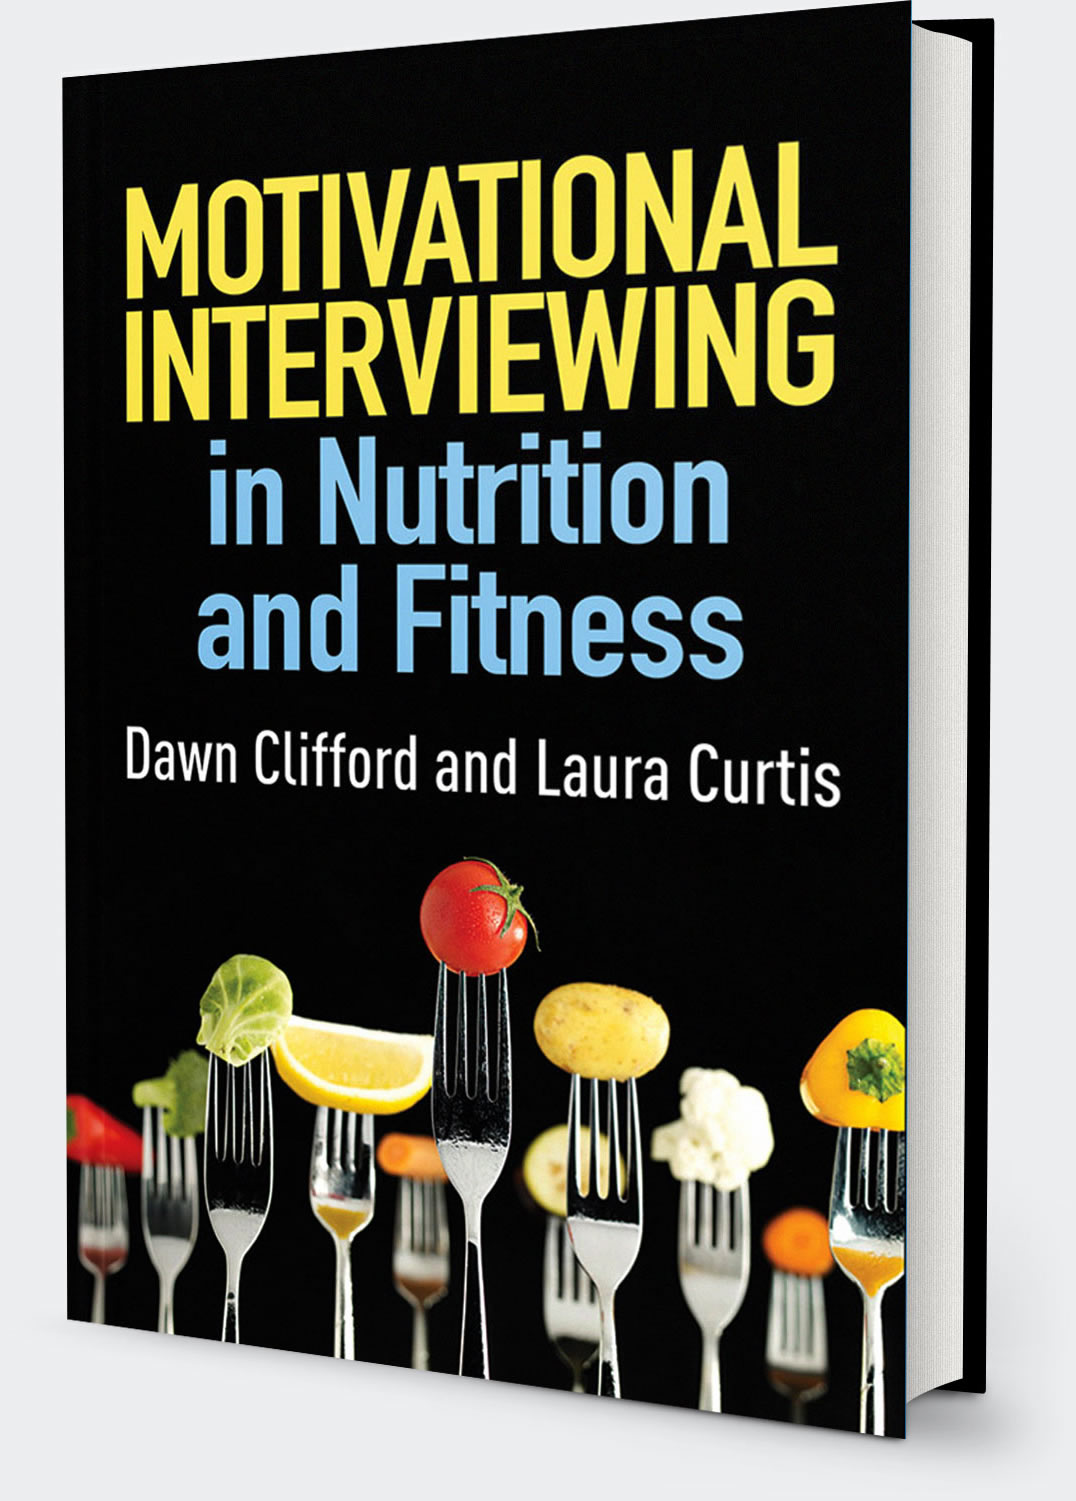 Motivation Interviewing in Nutrition and Fitness